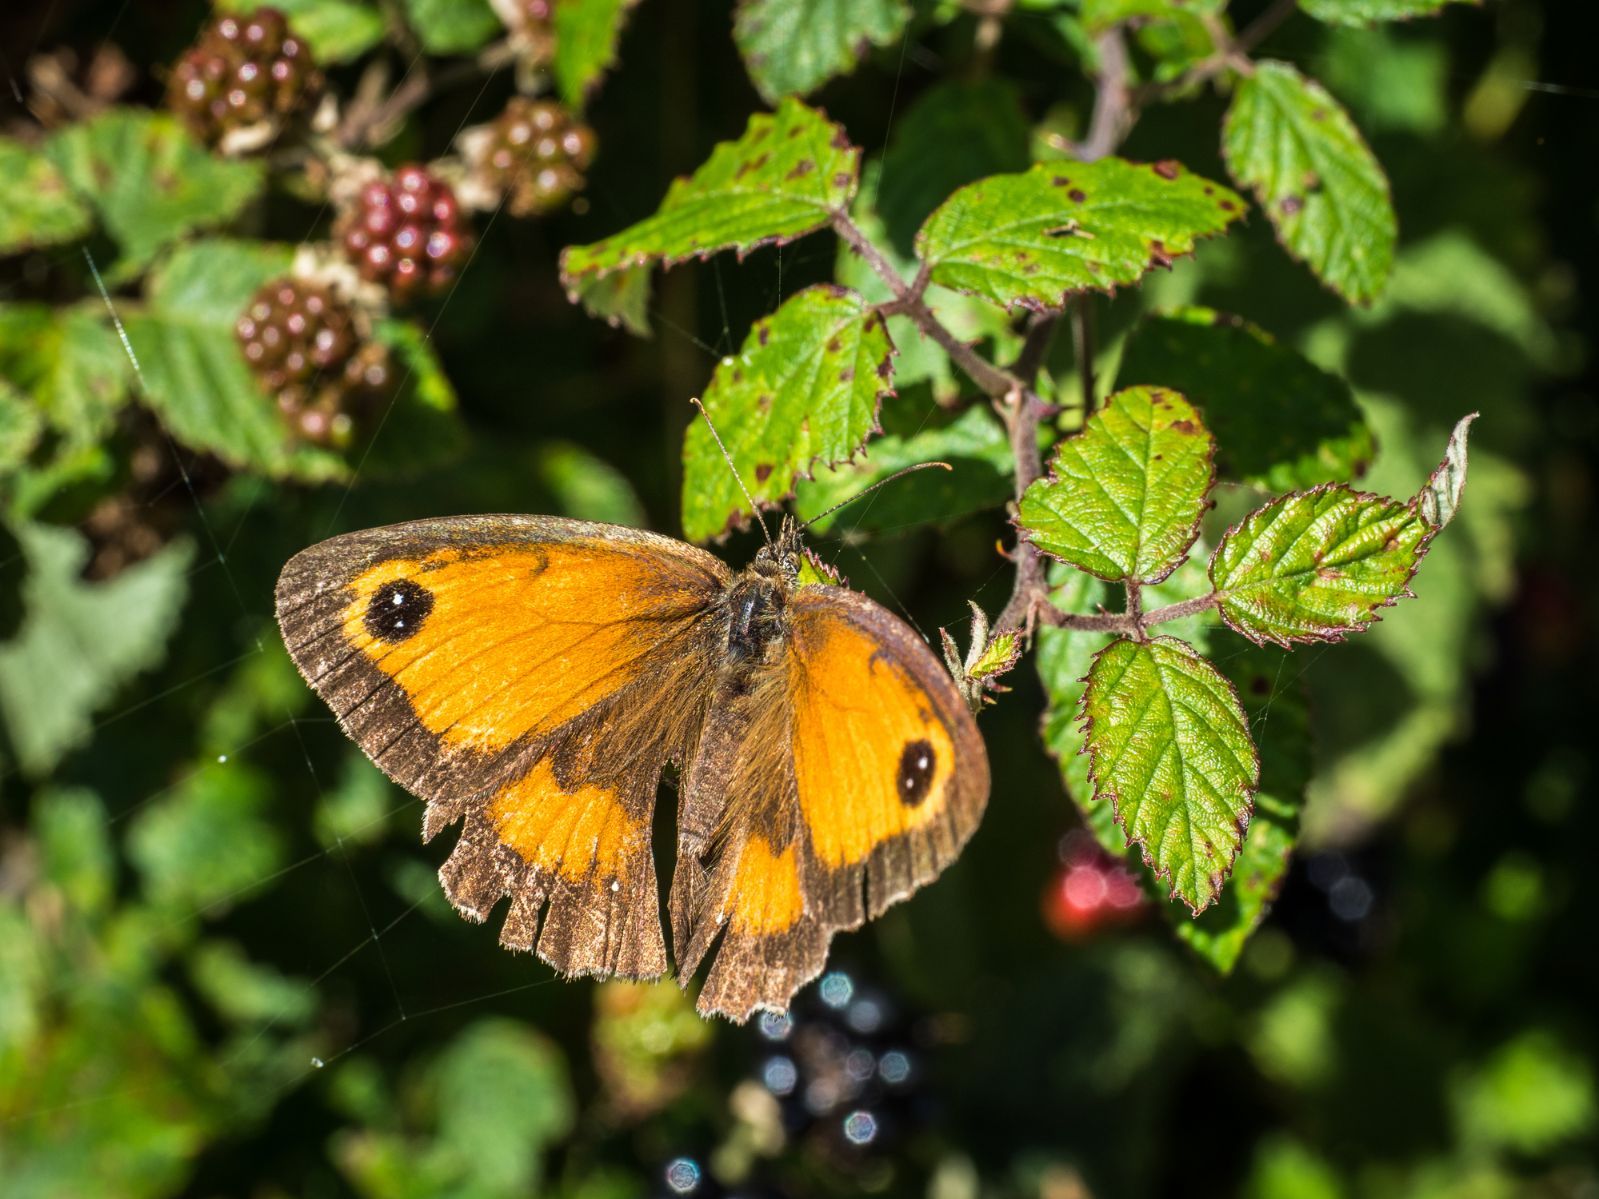 A gatekeeper butterfly (Pyronia tithonus), also known as the hedge brown, seen on brambles near Lydd, Kent, England. Photo: Getty